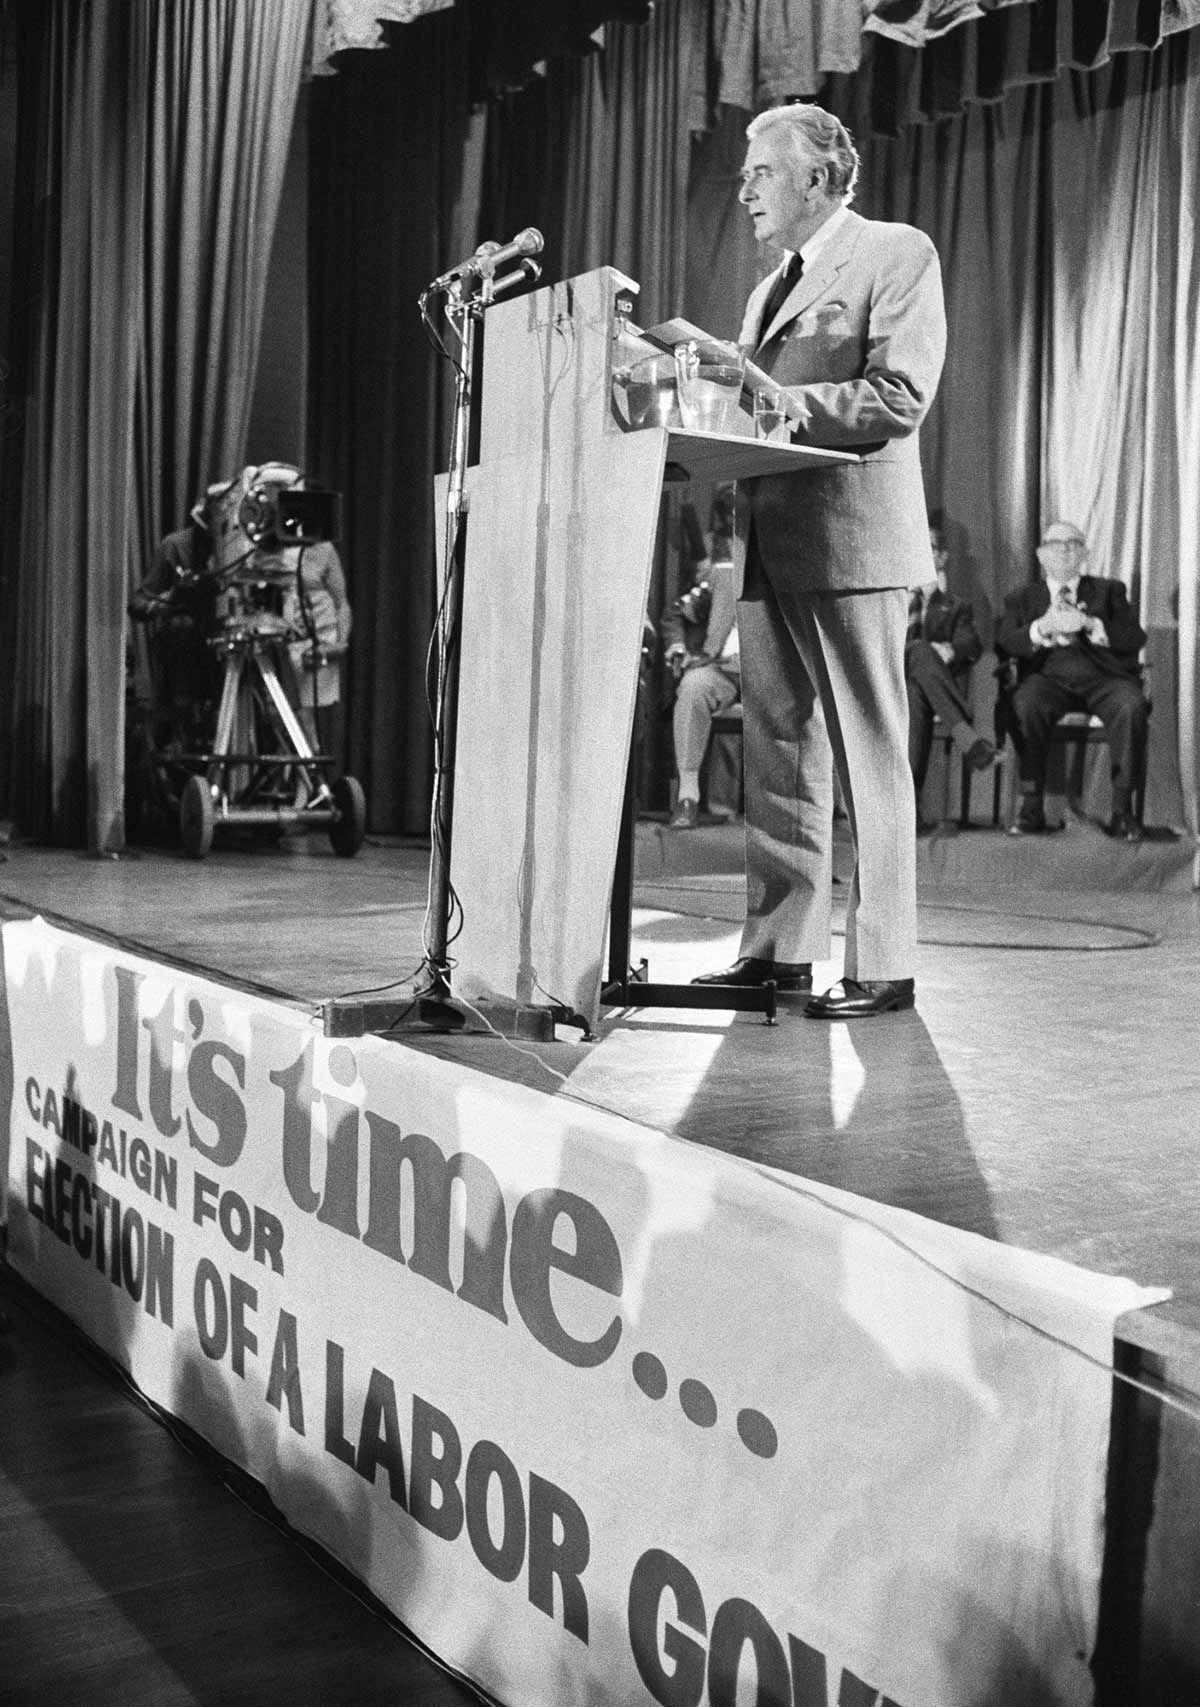 Black and white photograph of a man on stage delivering a speech while a film crew and other dignitaries watch on. There is a banner at the front of the stage printed with 'It's time... / CAMPAIGN FOR ELECTION OF A LABOR GOVERNMENT'.